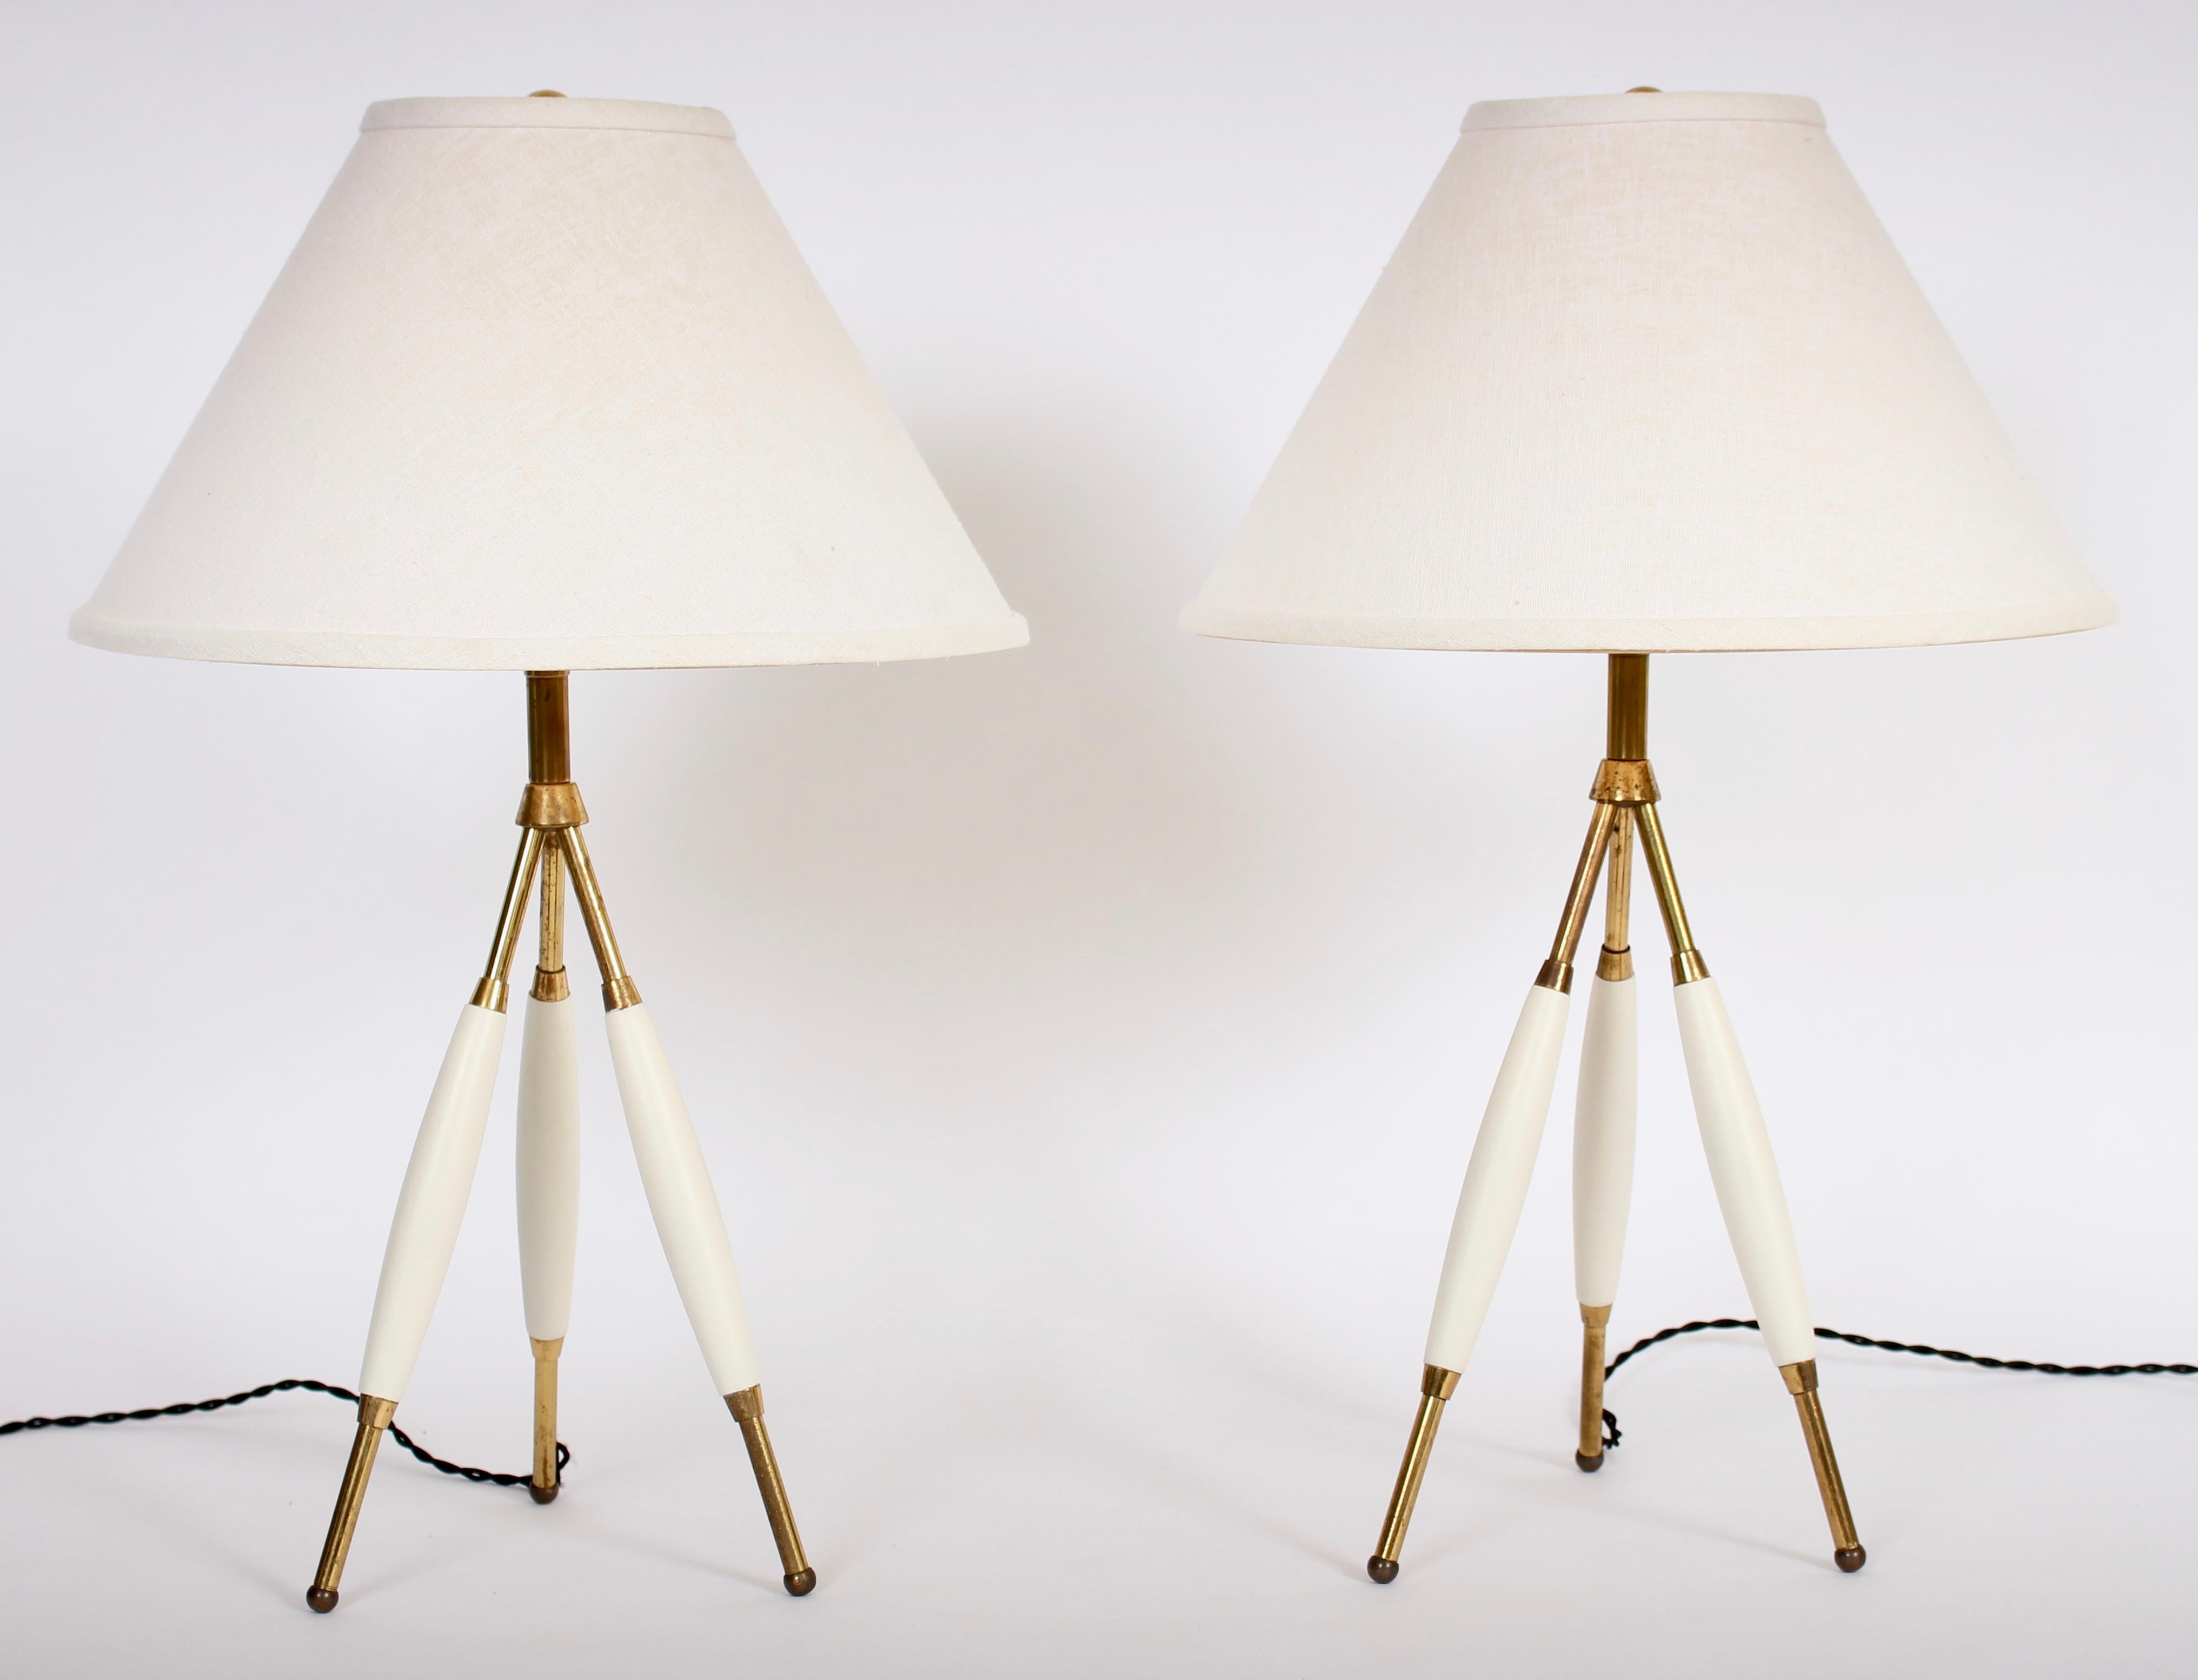 Classic Gerald Thurston for Lightolier Co. brass and off-white enameled wood tripod lamps. Featuring three patinated brass tubular rods per, applied rounded wooden details and brass ball feet. Shades shown for display only (9 H x 5 D top x 14 D